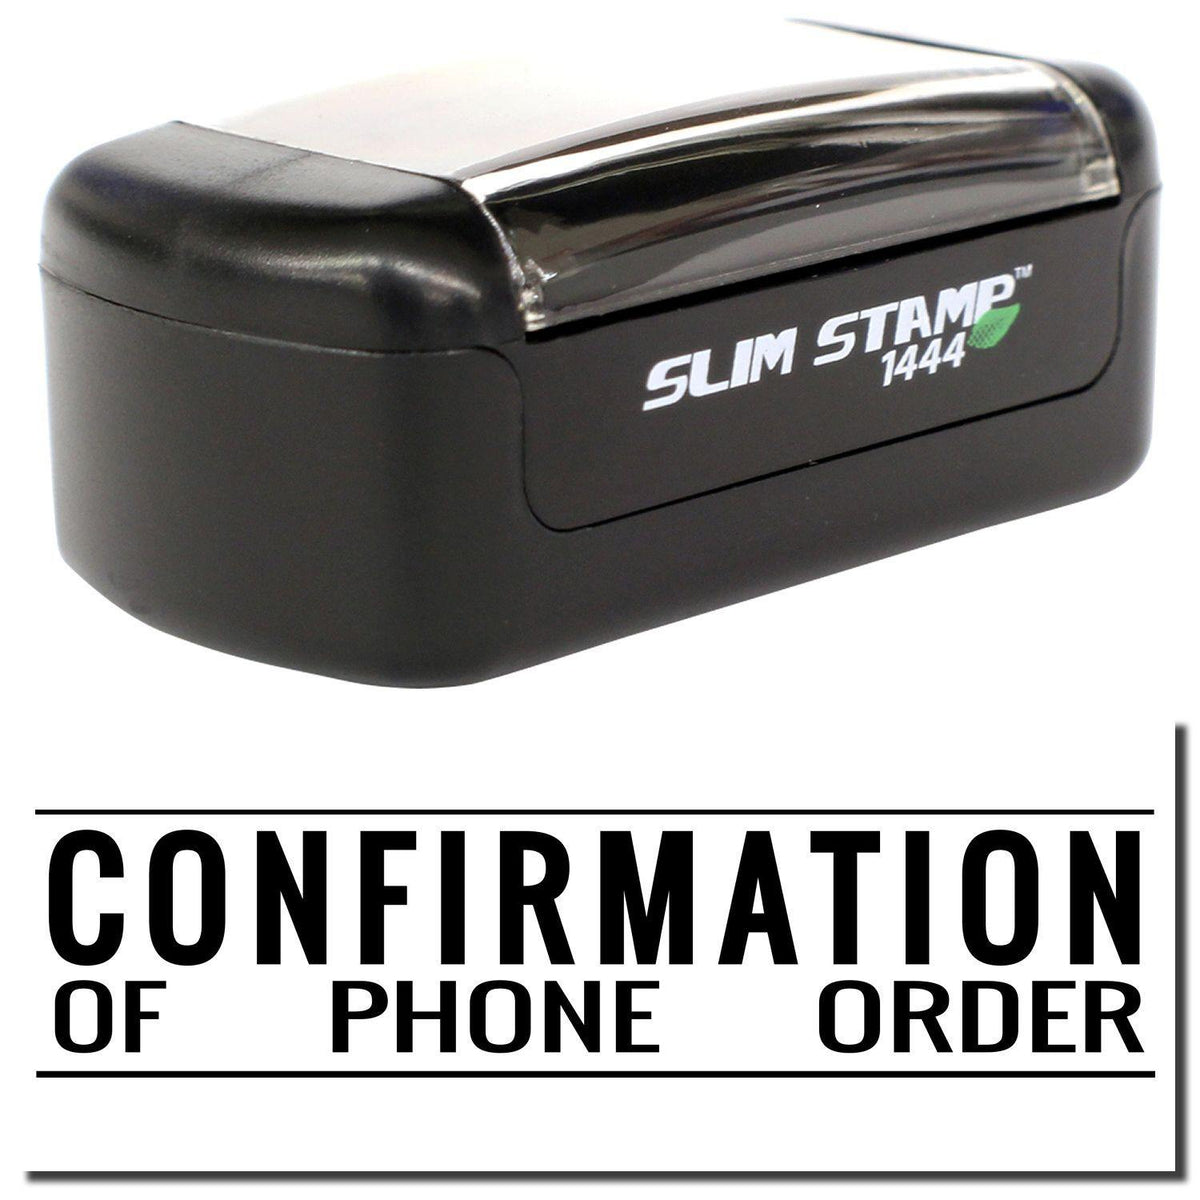 A stock office pre-inked stamp with a stamped image showing how the text &quot;CONFIRMATION OF PHONE ORDER&quot; is displayed after stamping.